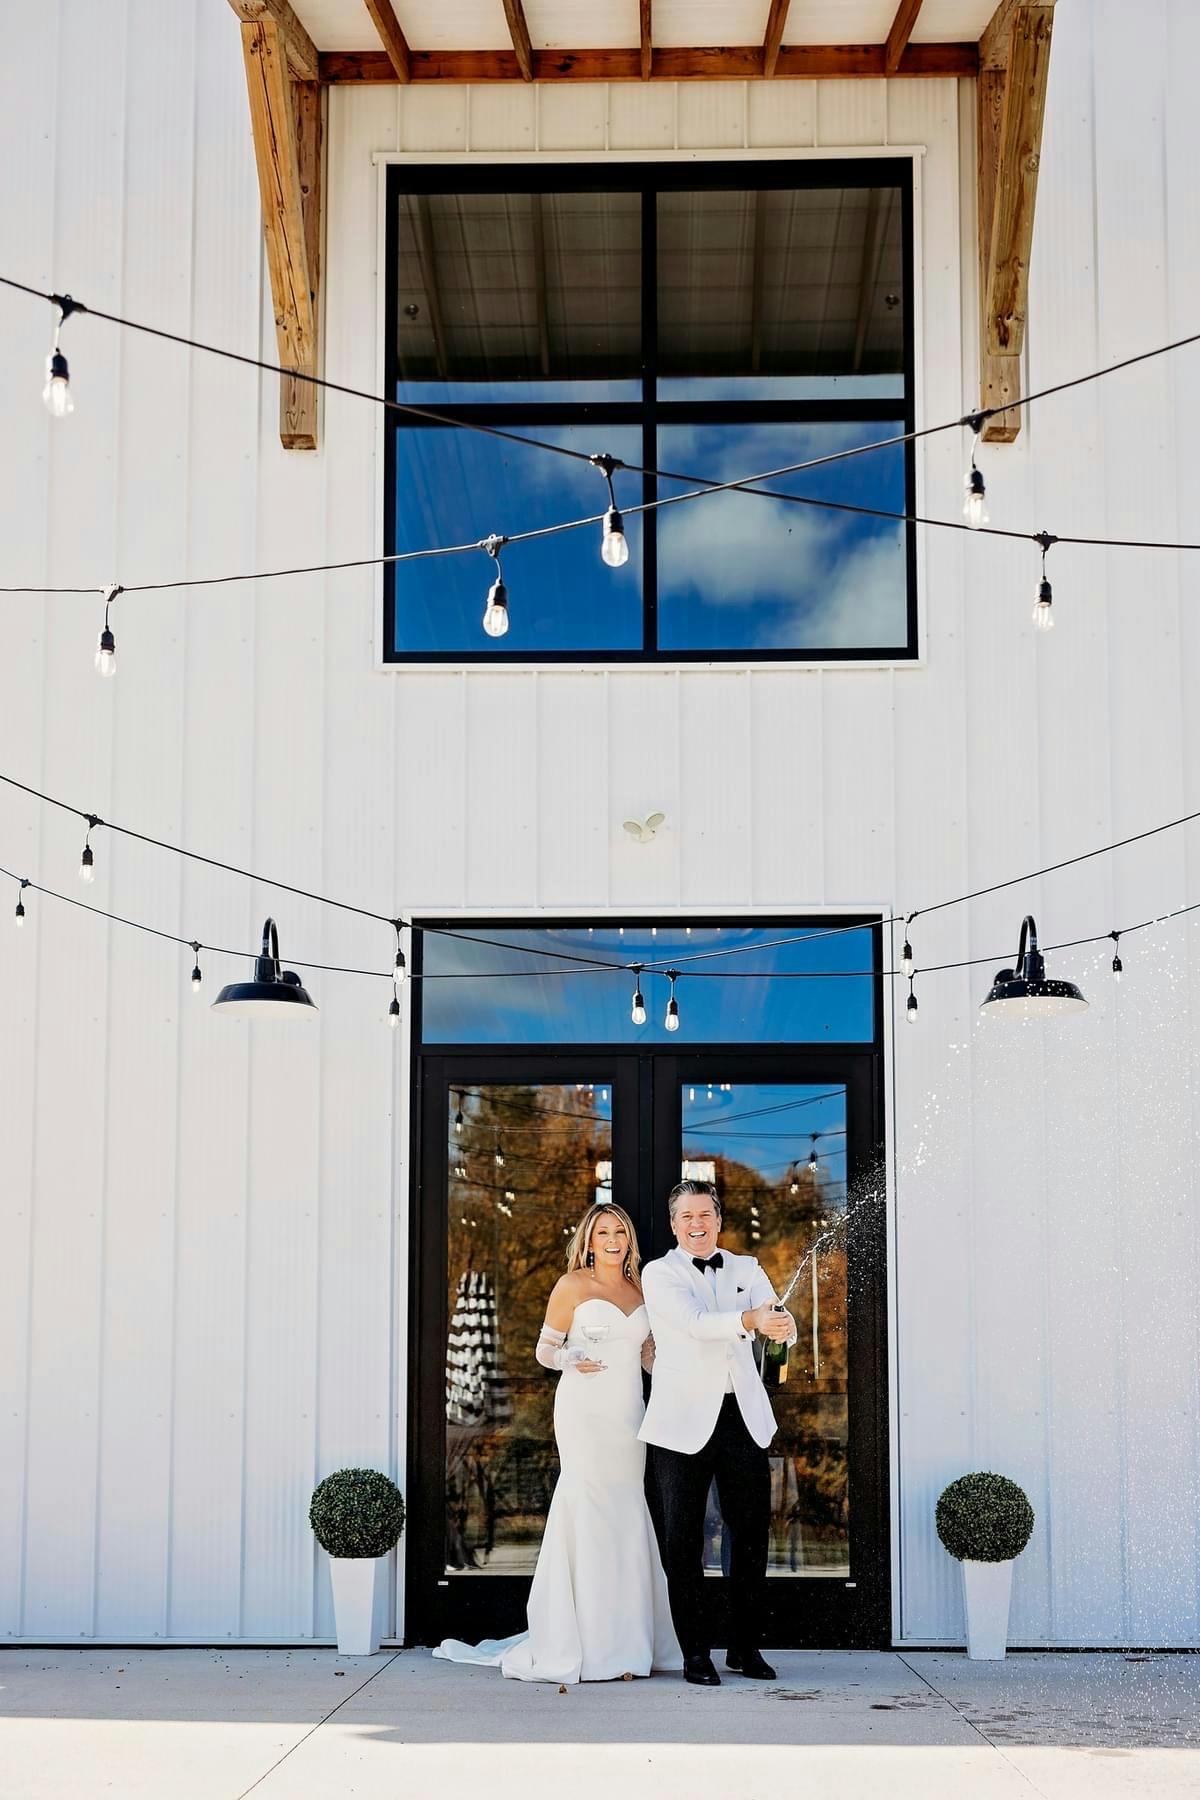 Picture of Bride and groom popping a bottle of shampain in front of building with string lights